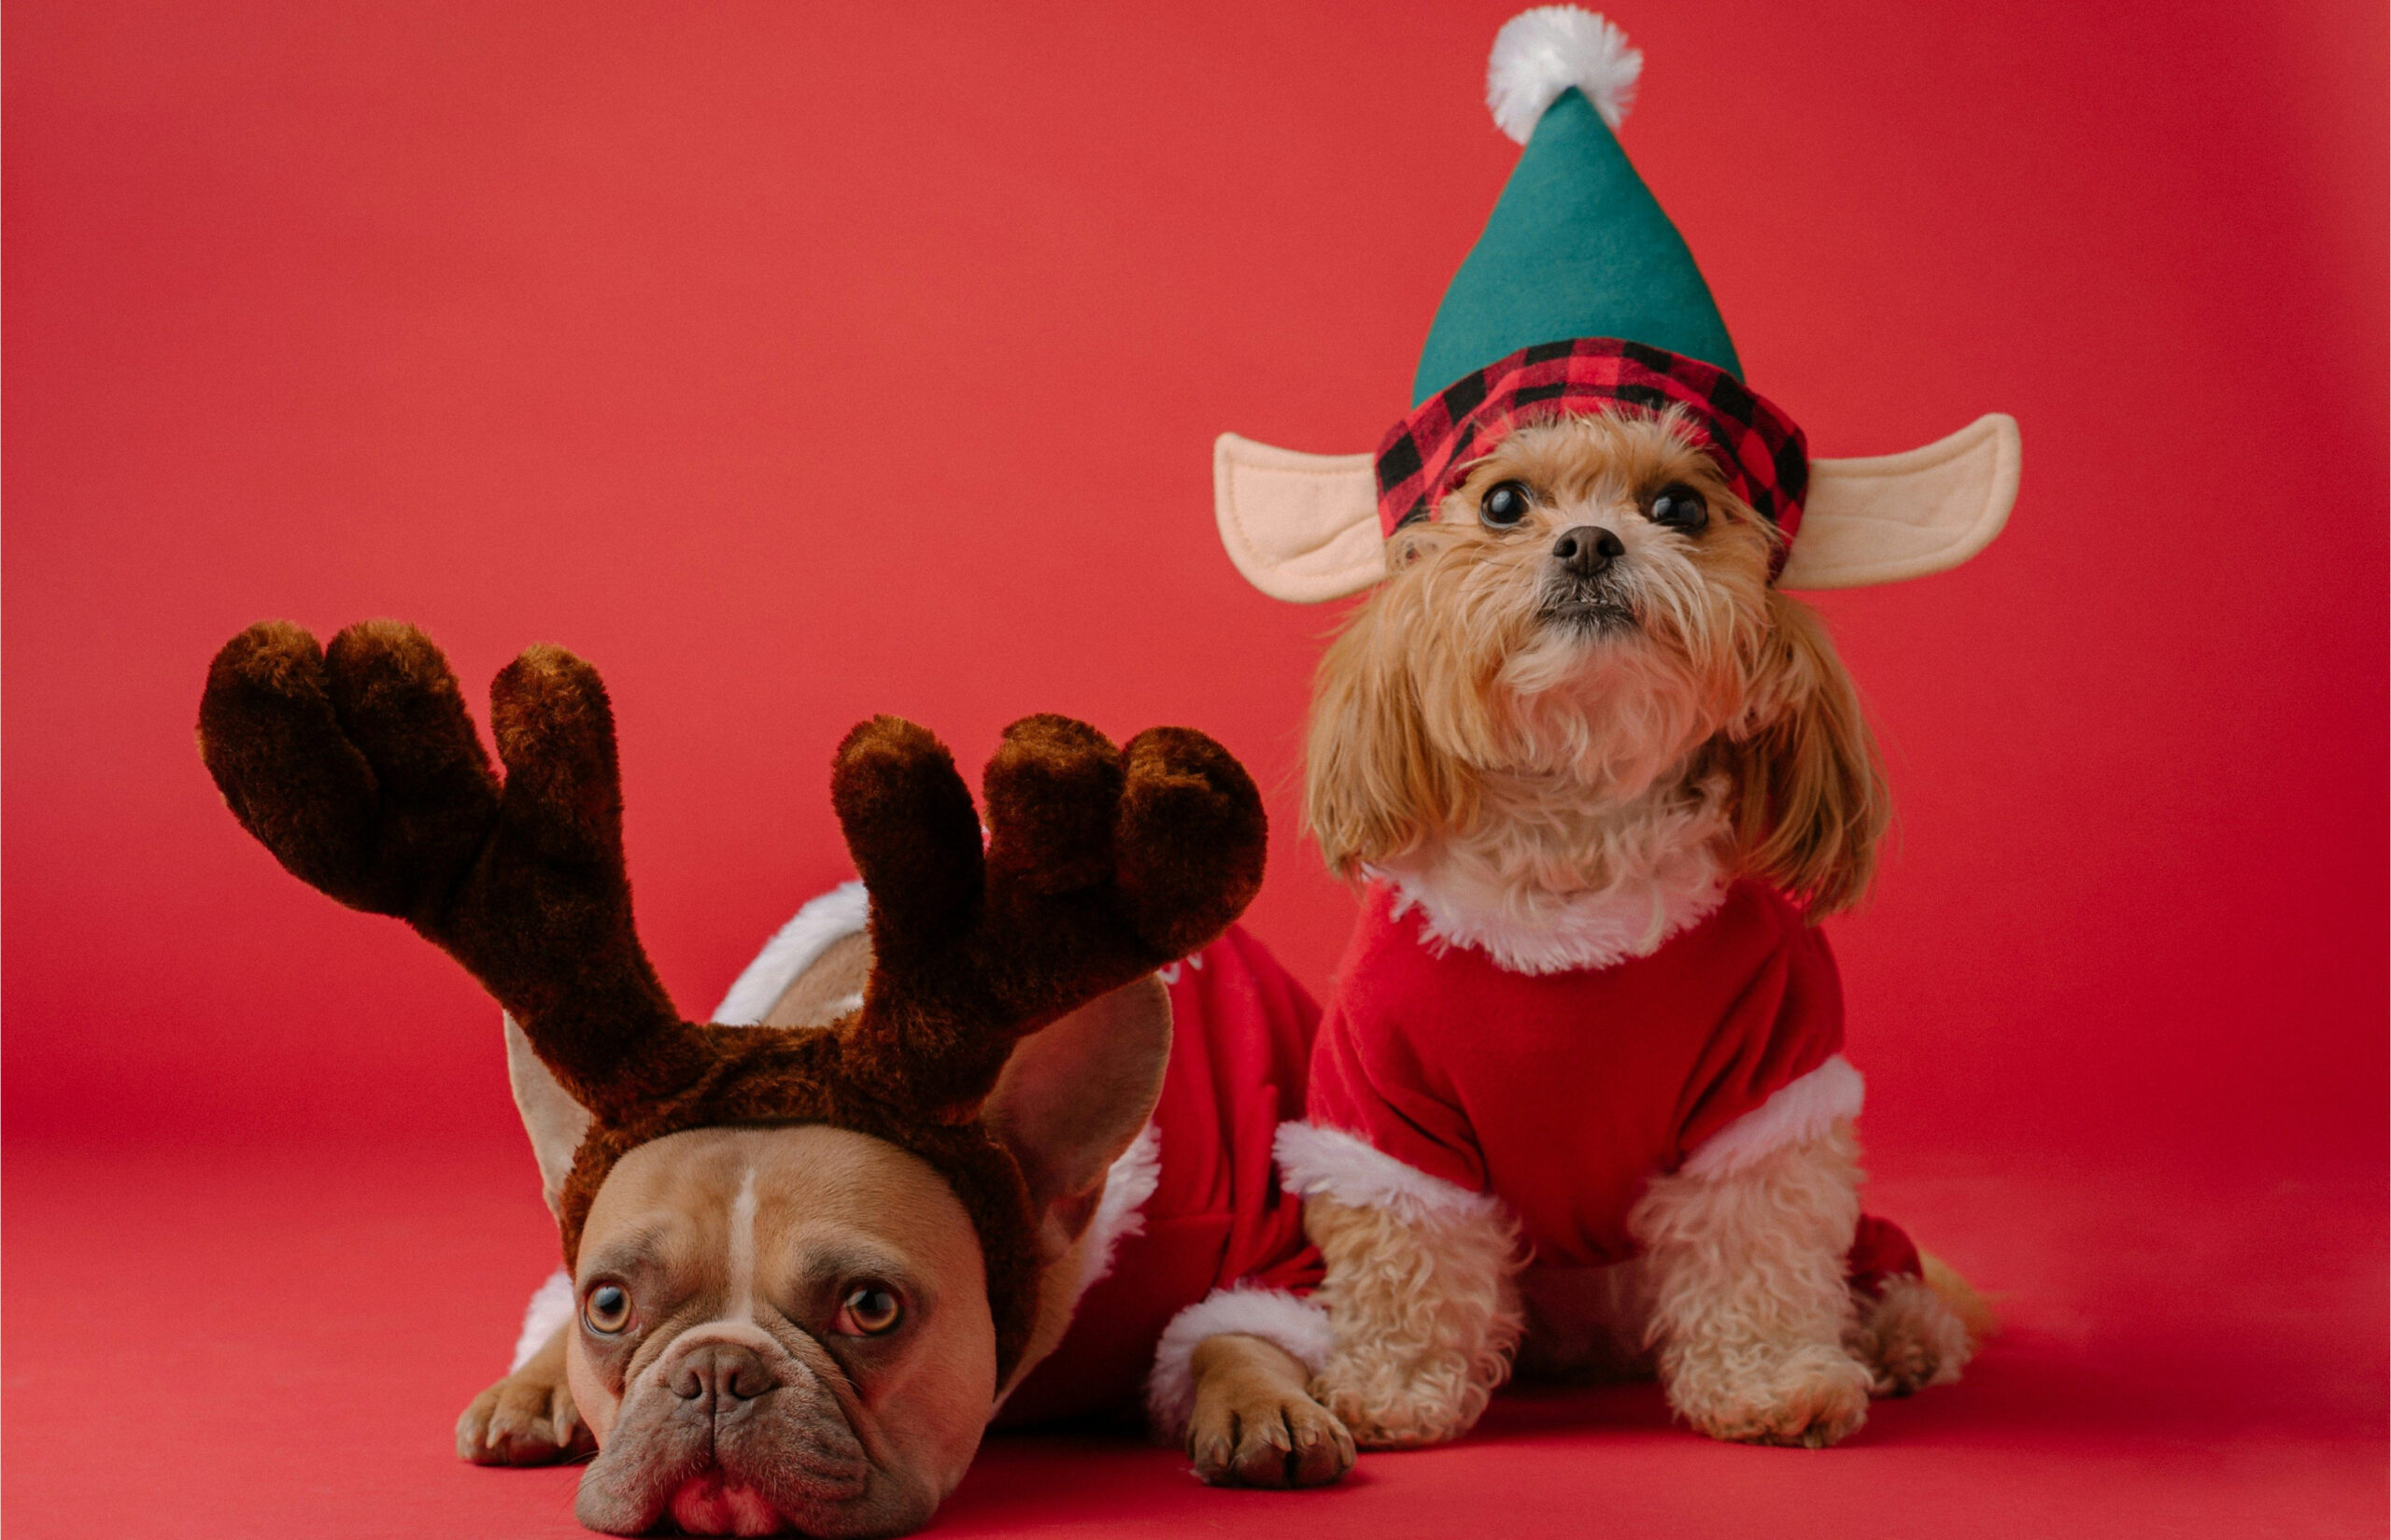 Dogs dressed up in Christmas costumes